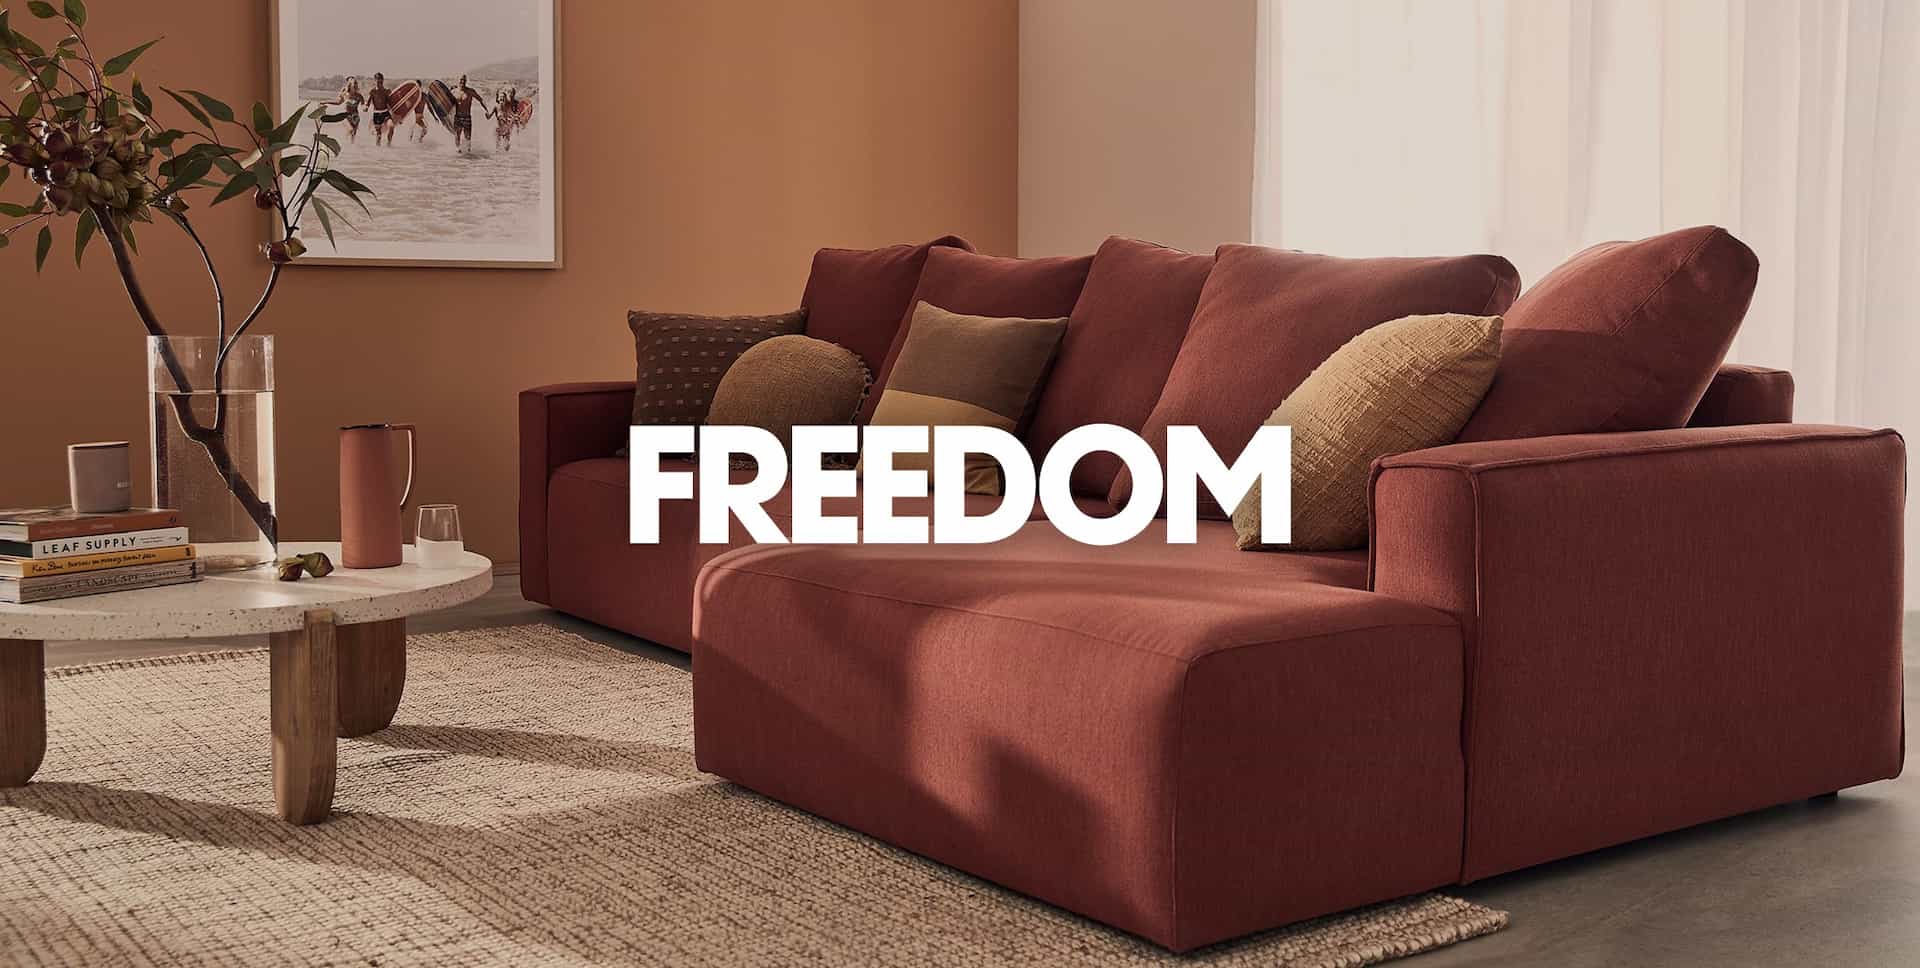 Freedom Blackout sale 30% OFF cushions, 25% OFF on rugs, lighting & more